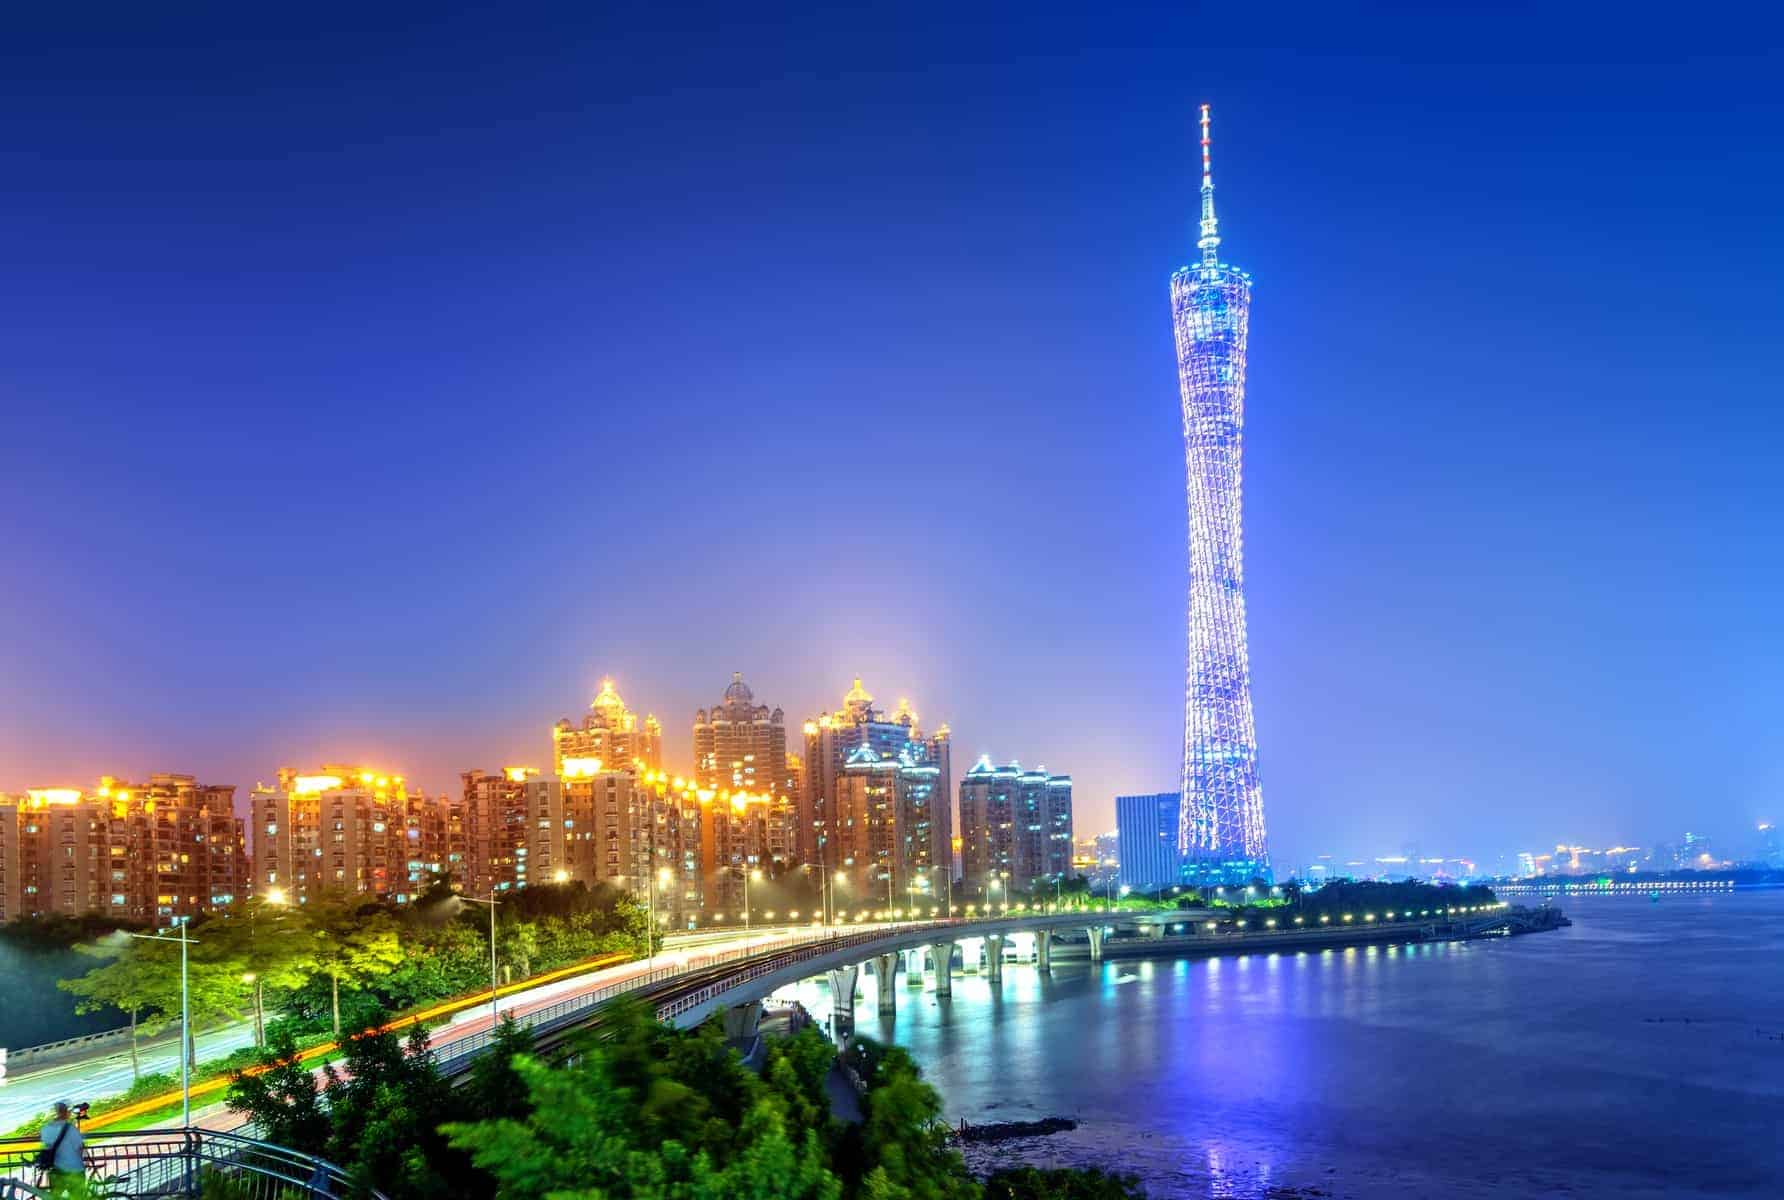 View of Canton tower (600m) in Guangzhou. One of the most famous landmark in Guangzhou city.